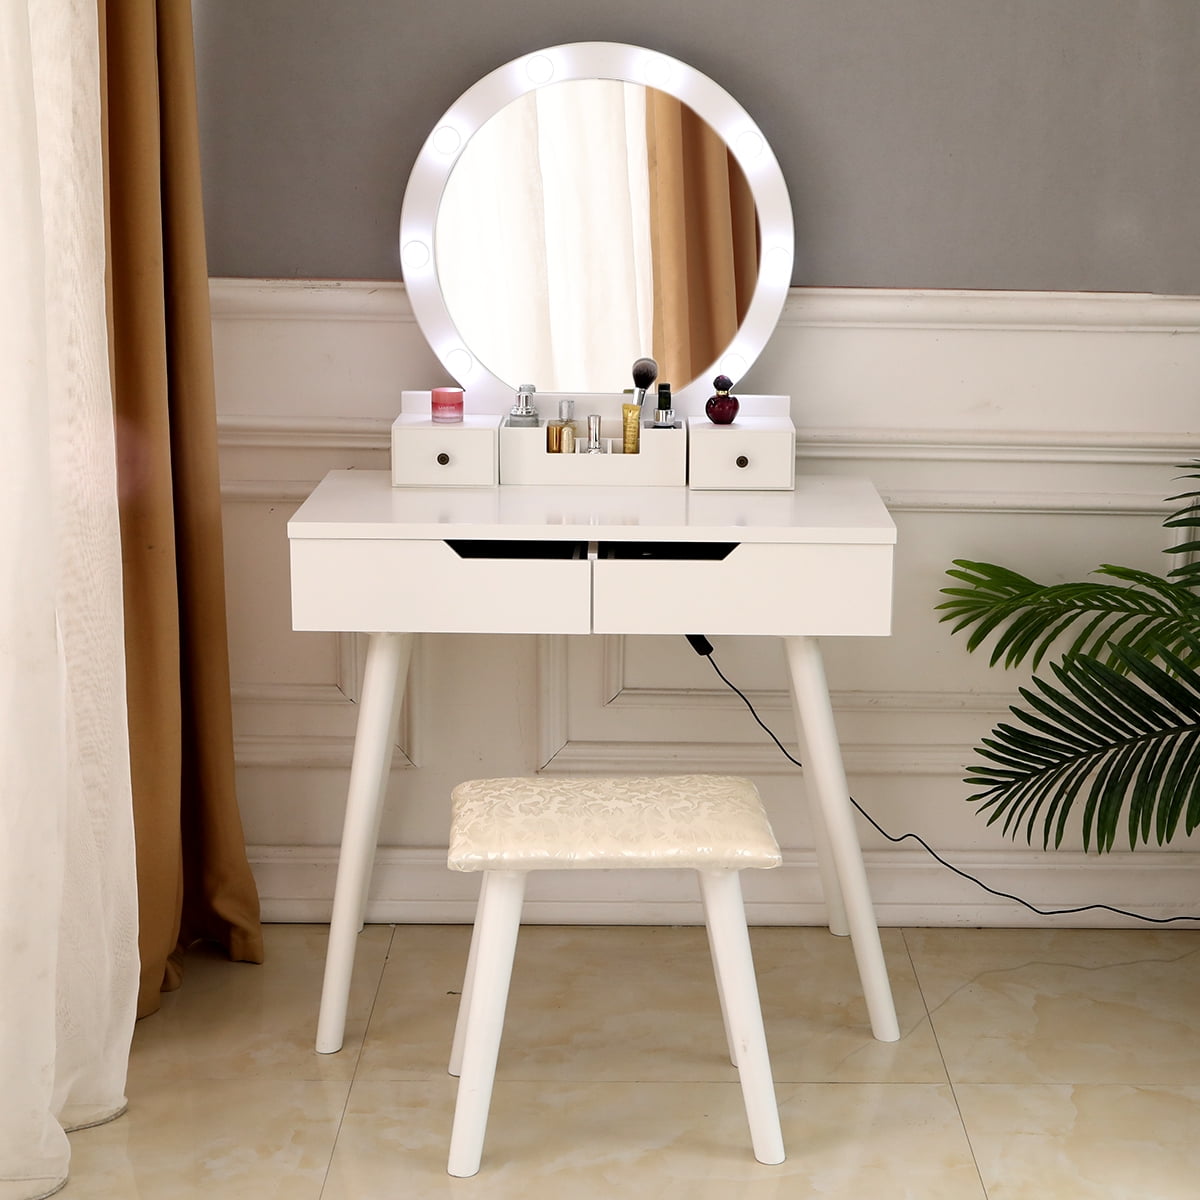 Details about   Dressing Table with Large Round Mirror and 8 Light Bulbs for Bedroom 